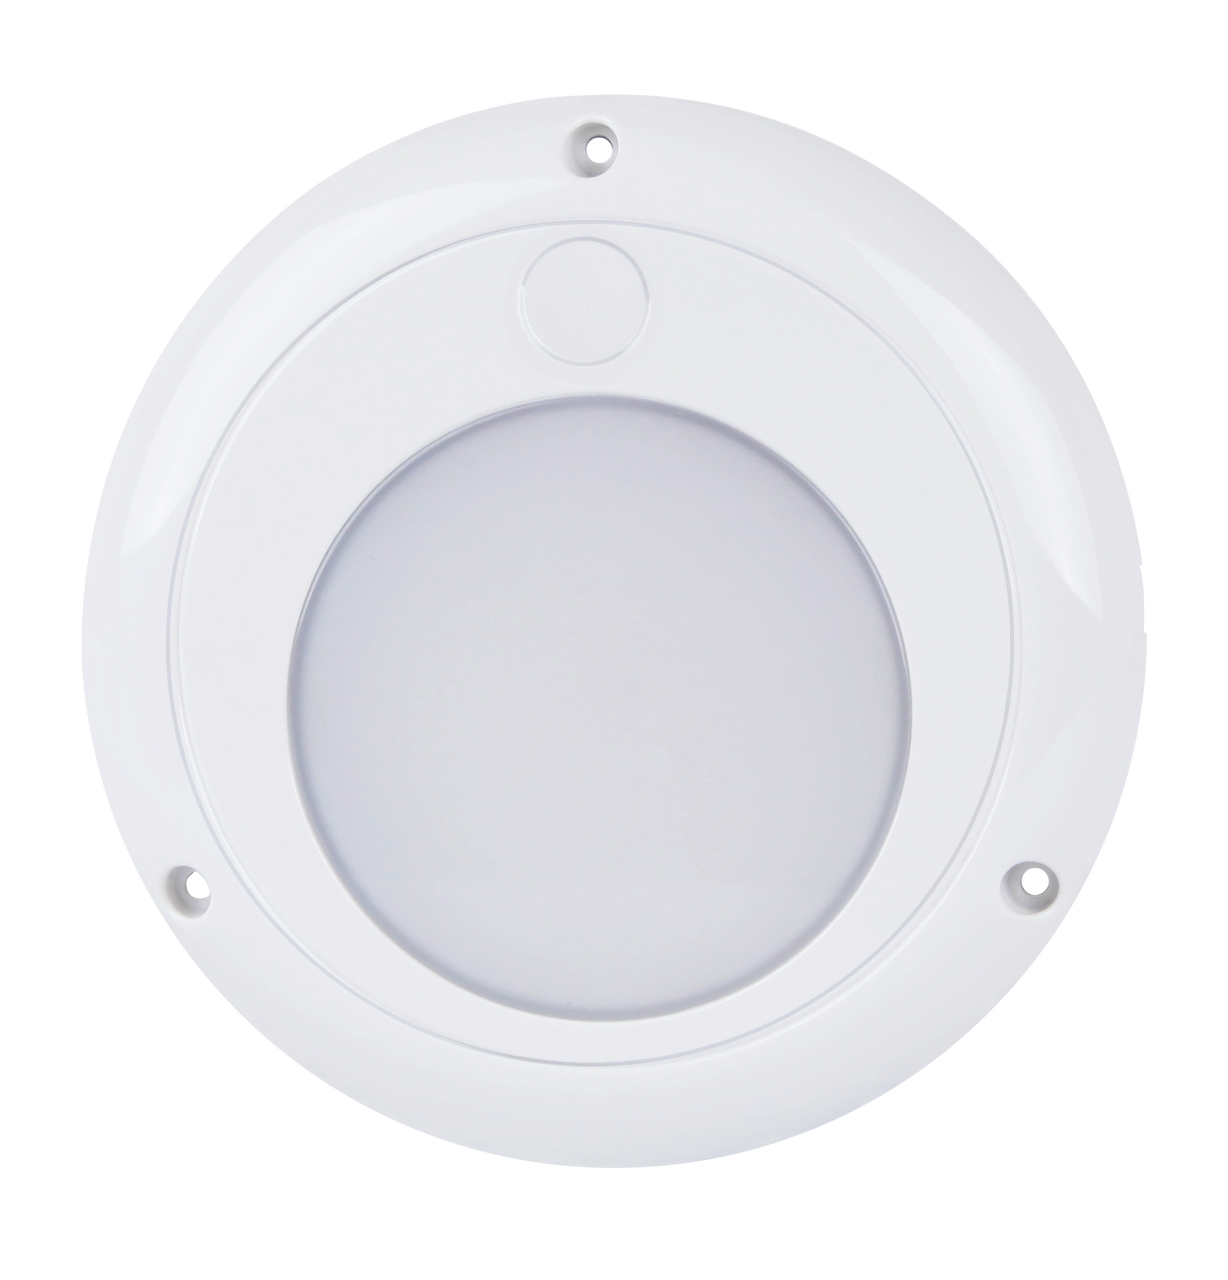 13118WM -  Interior, Exterior Light Surface Mount. Water Proof Design. Low Profile Design. 2 Year Warranty. Warm White. Autolamps.  Ultimate LED.